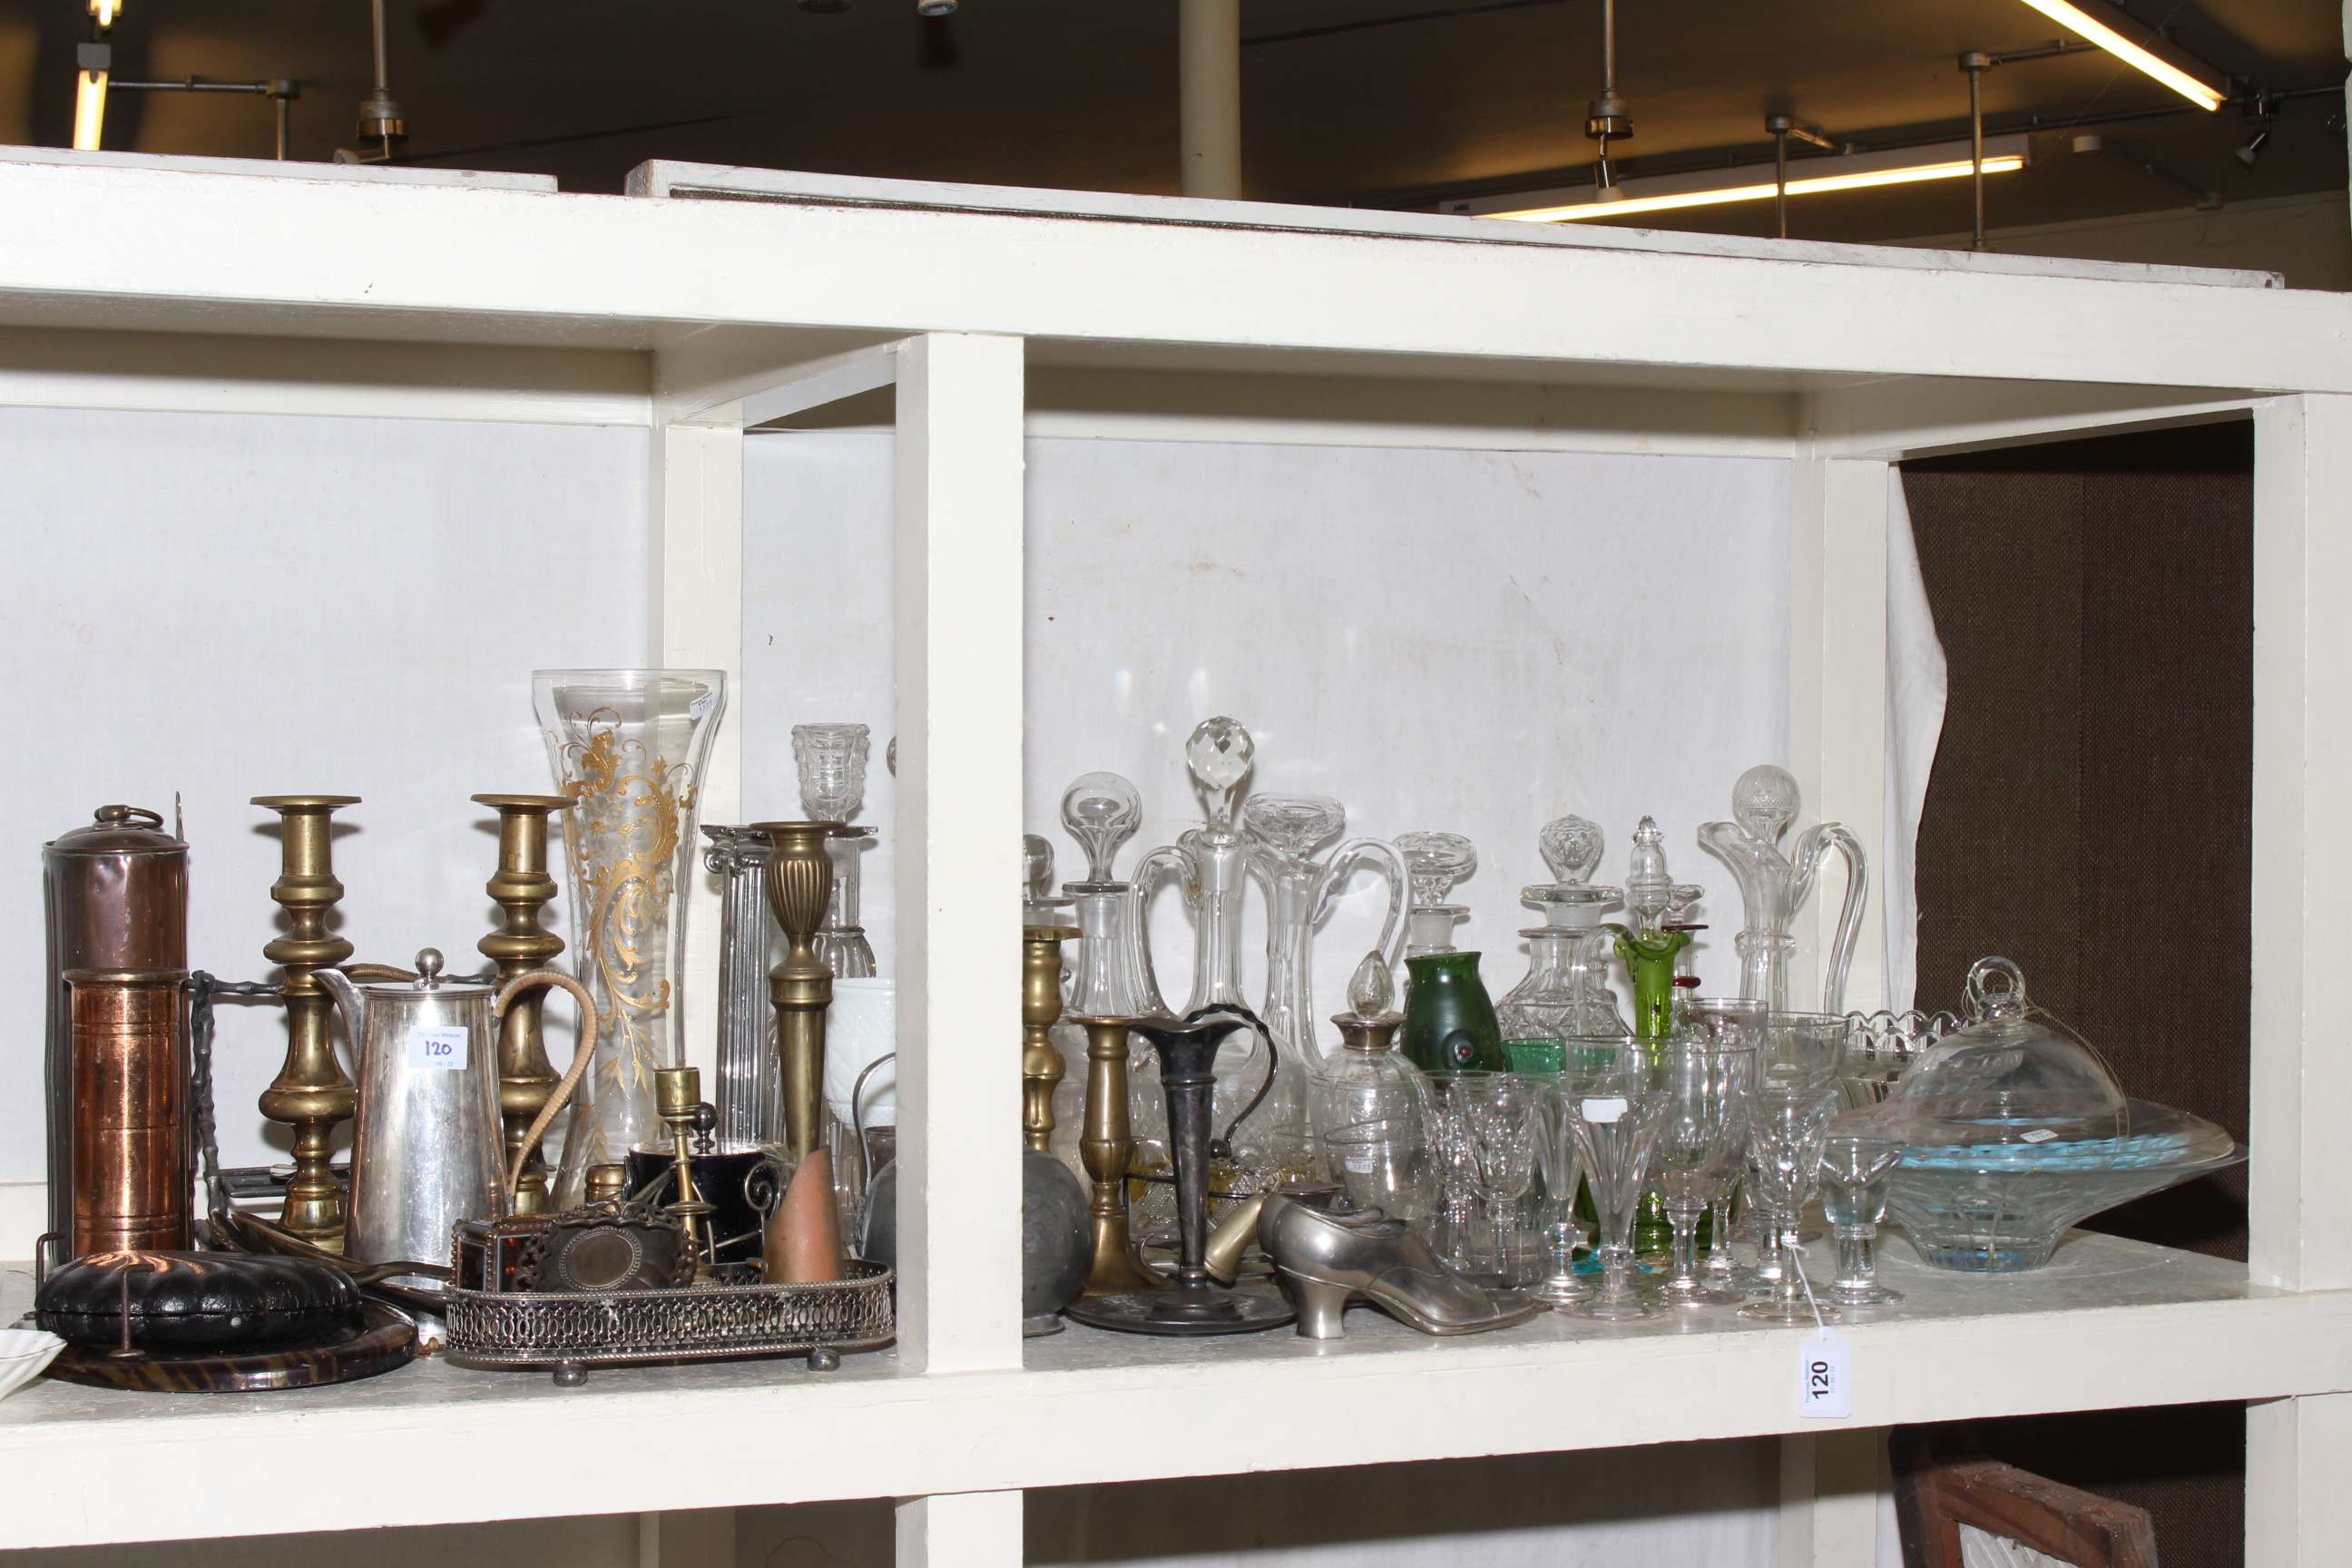 Collection of glass and metalwares including decanters together with two Minton? tiled panels.